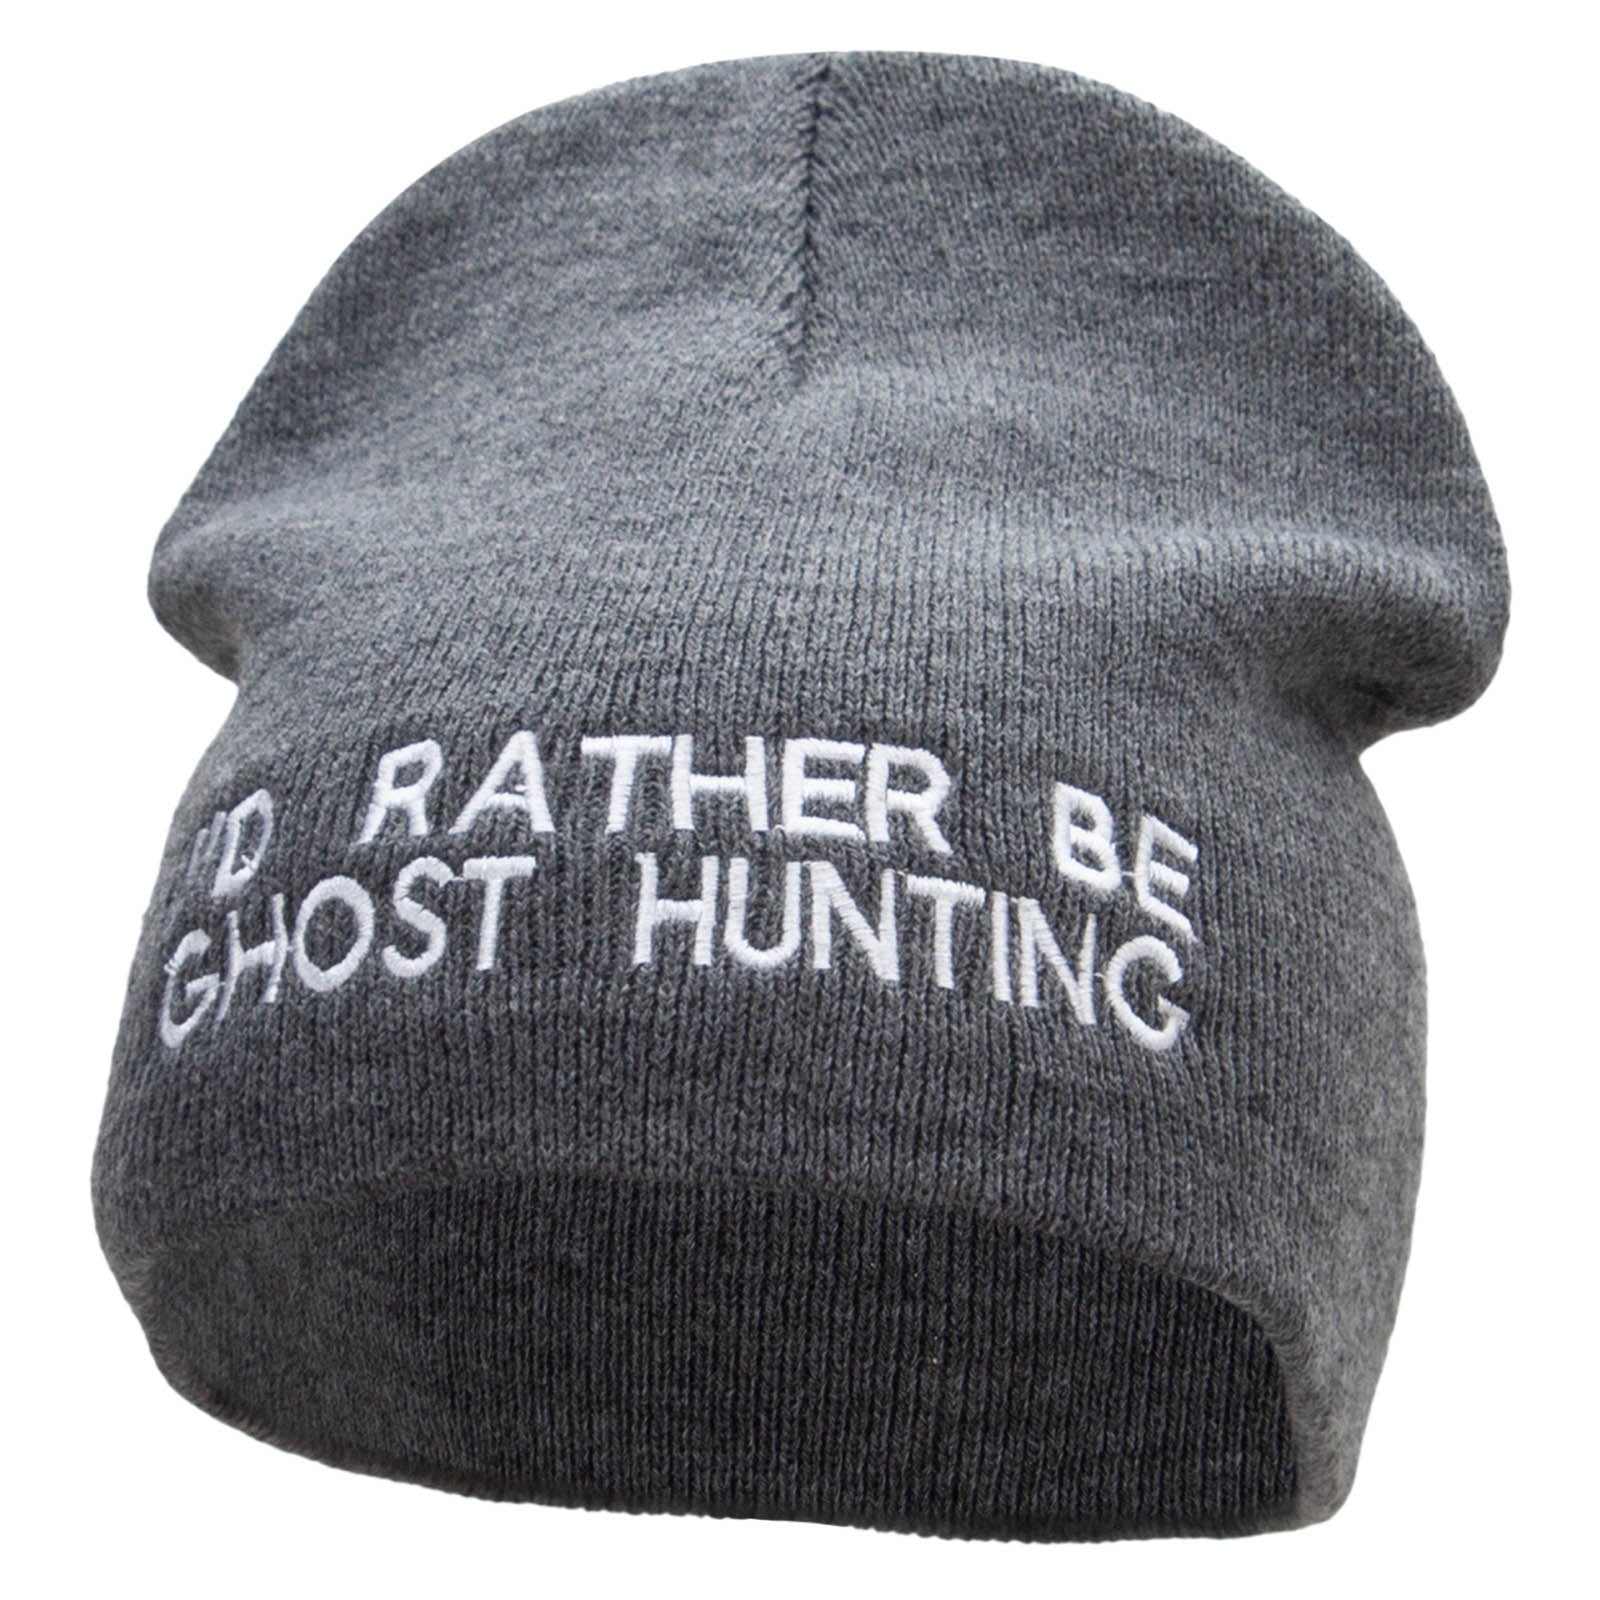 I&#039;d Rather Be Ghost Hunting Short Beanie - Dk Grey OSFM